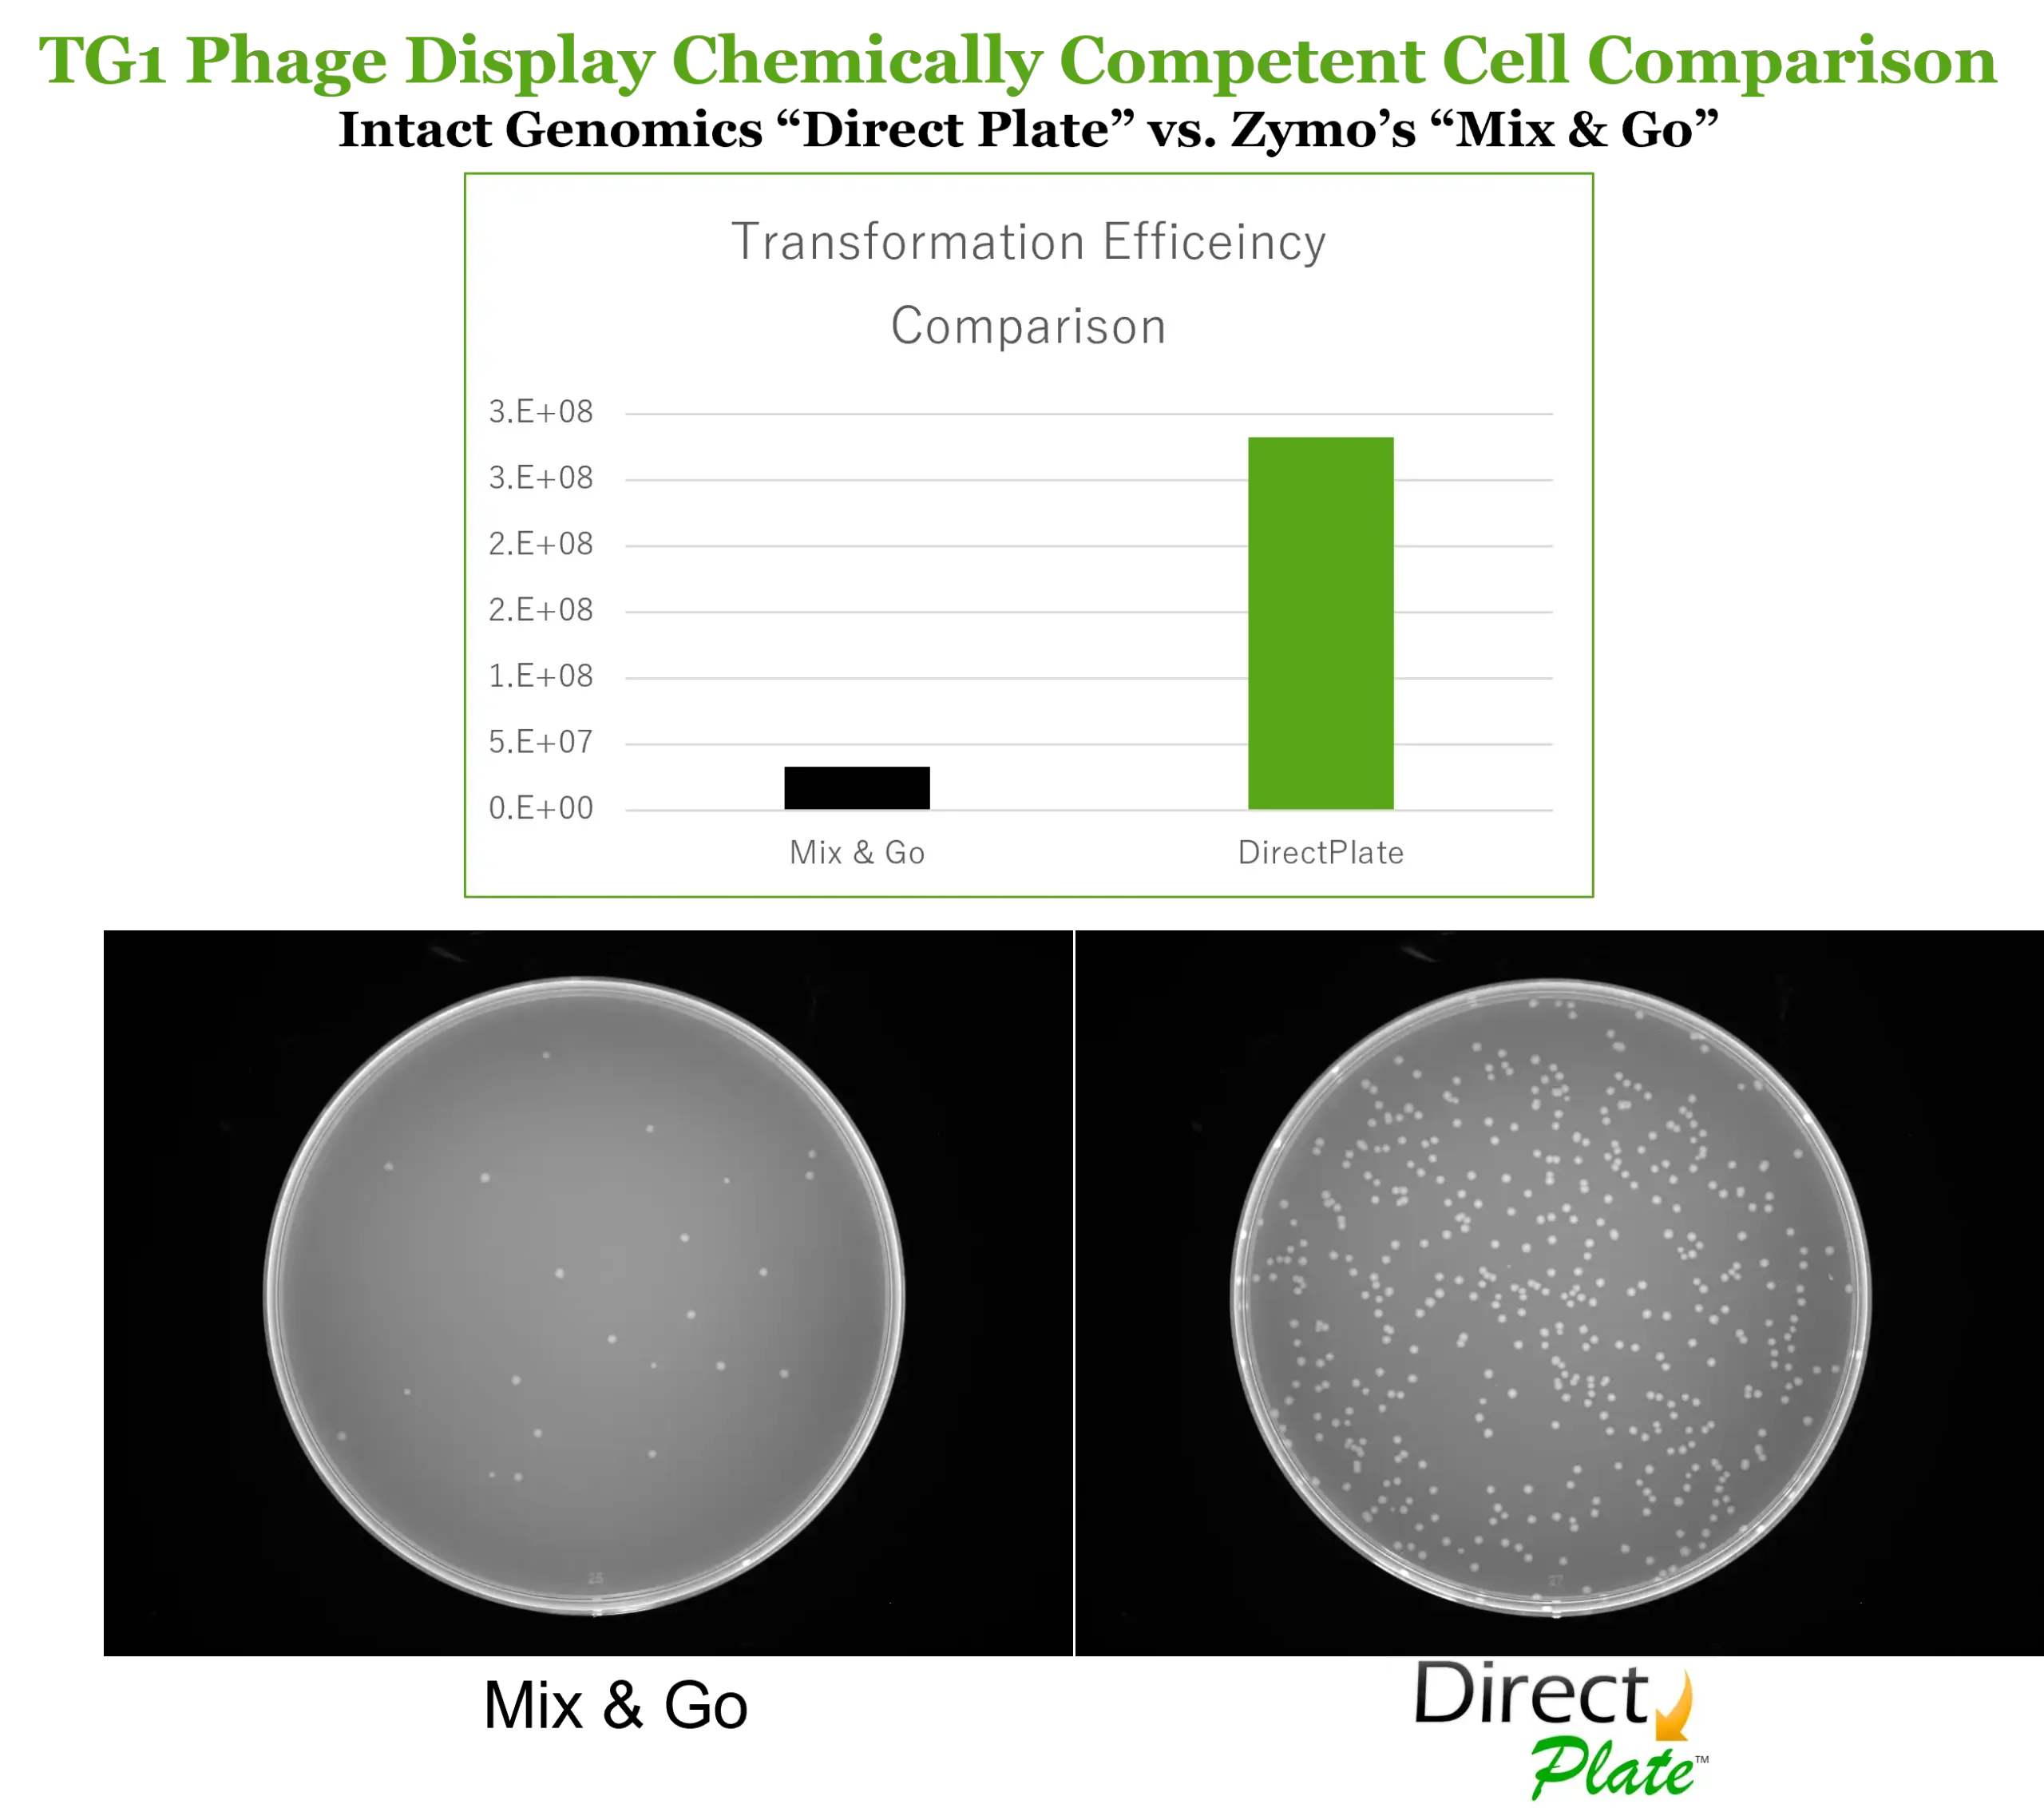 Direct Plate vs ZYMO TG-1 Phage Display Competent Cell Comparison